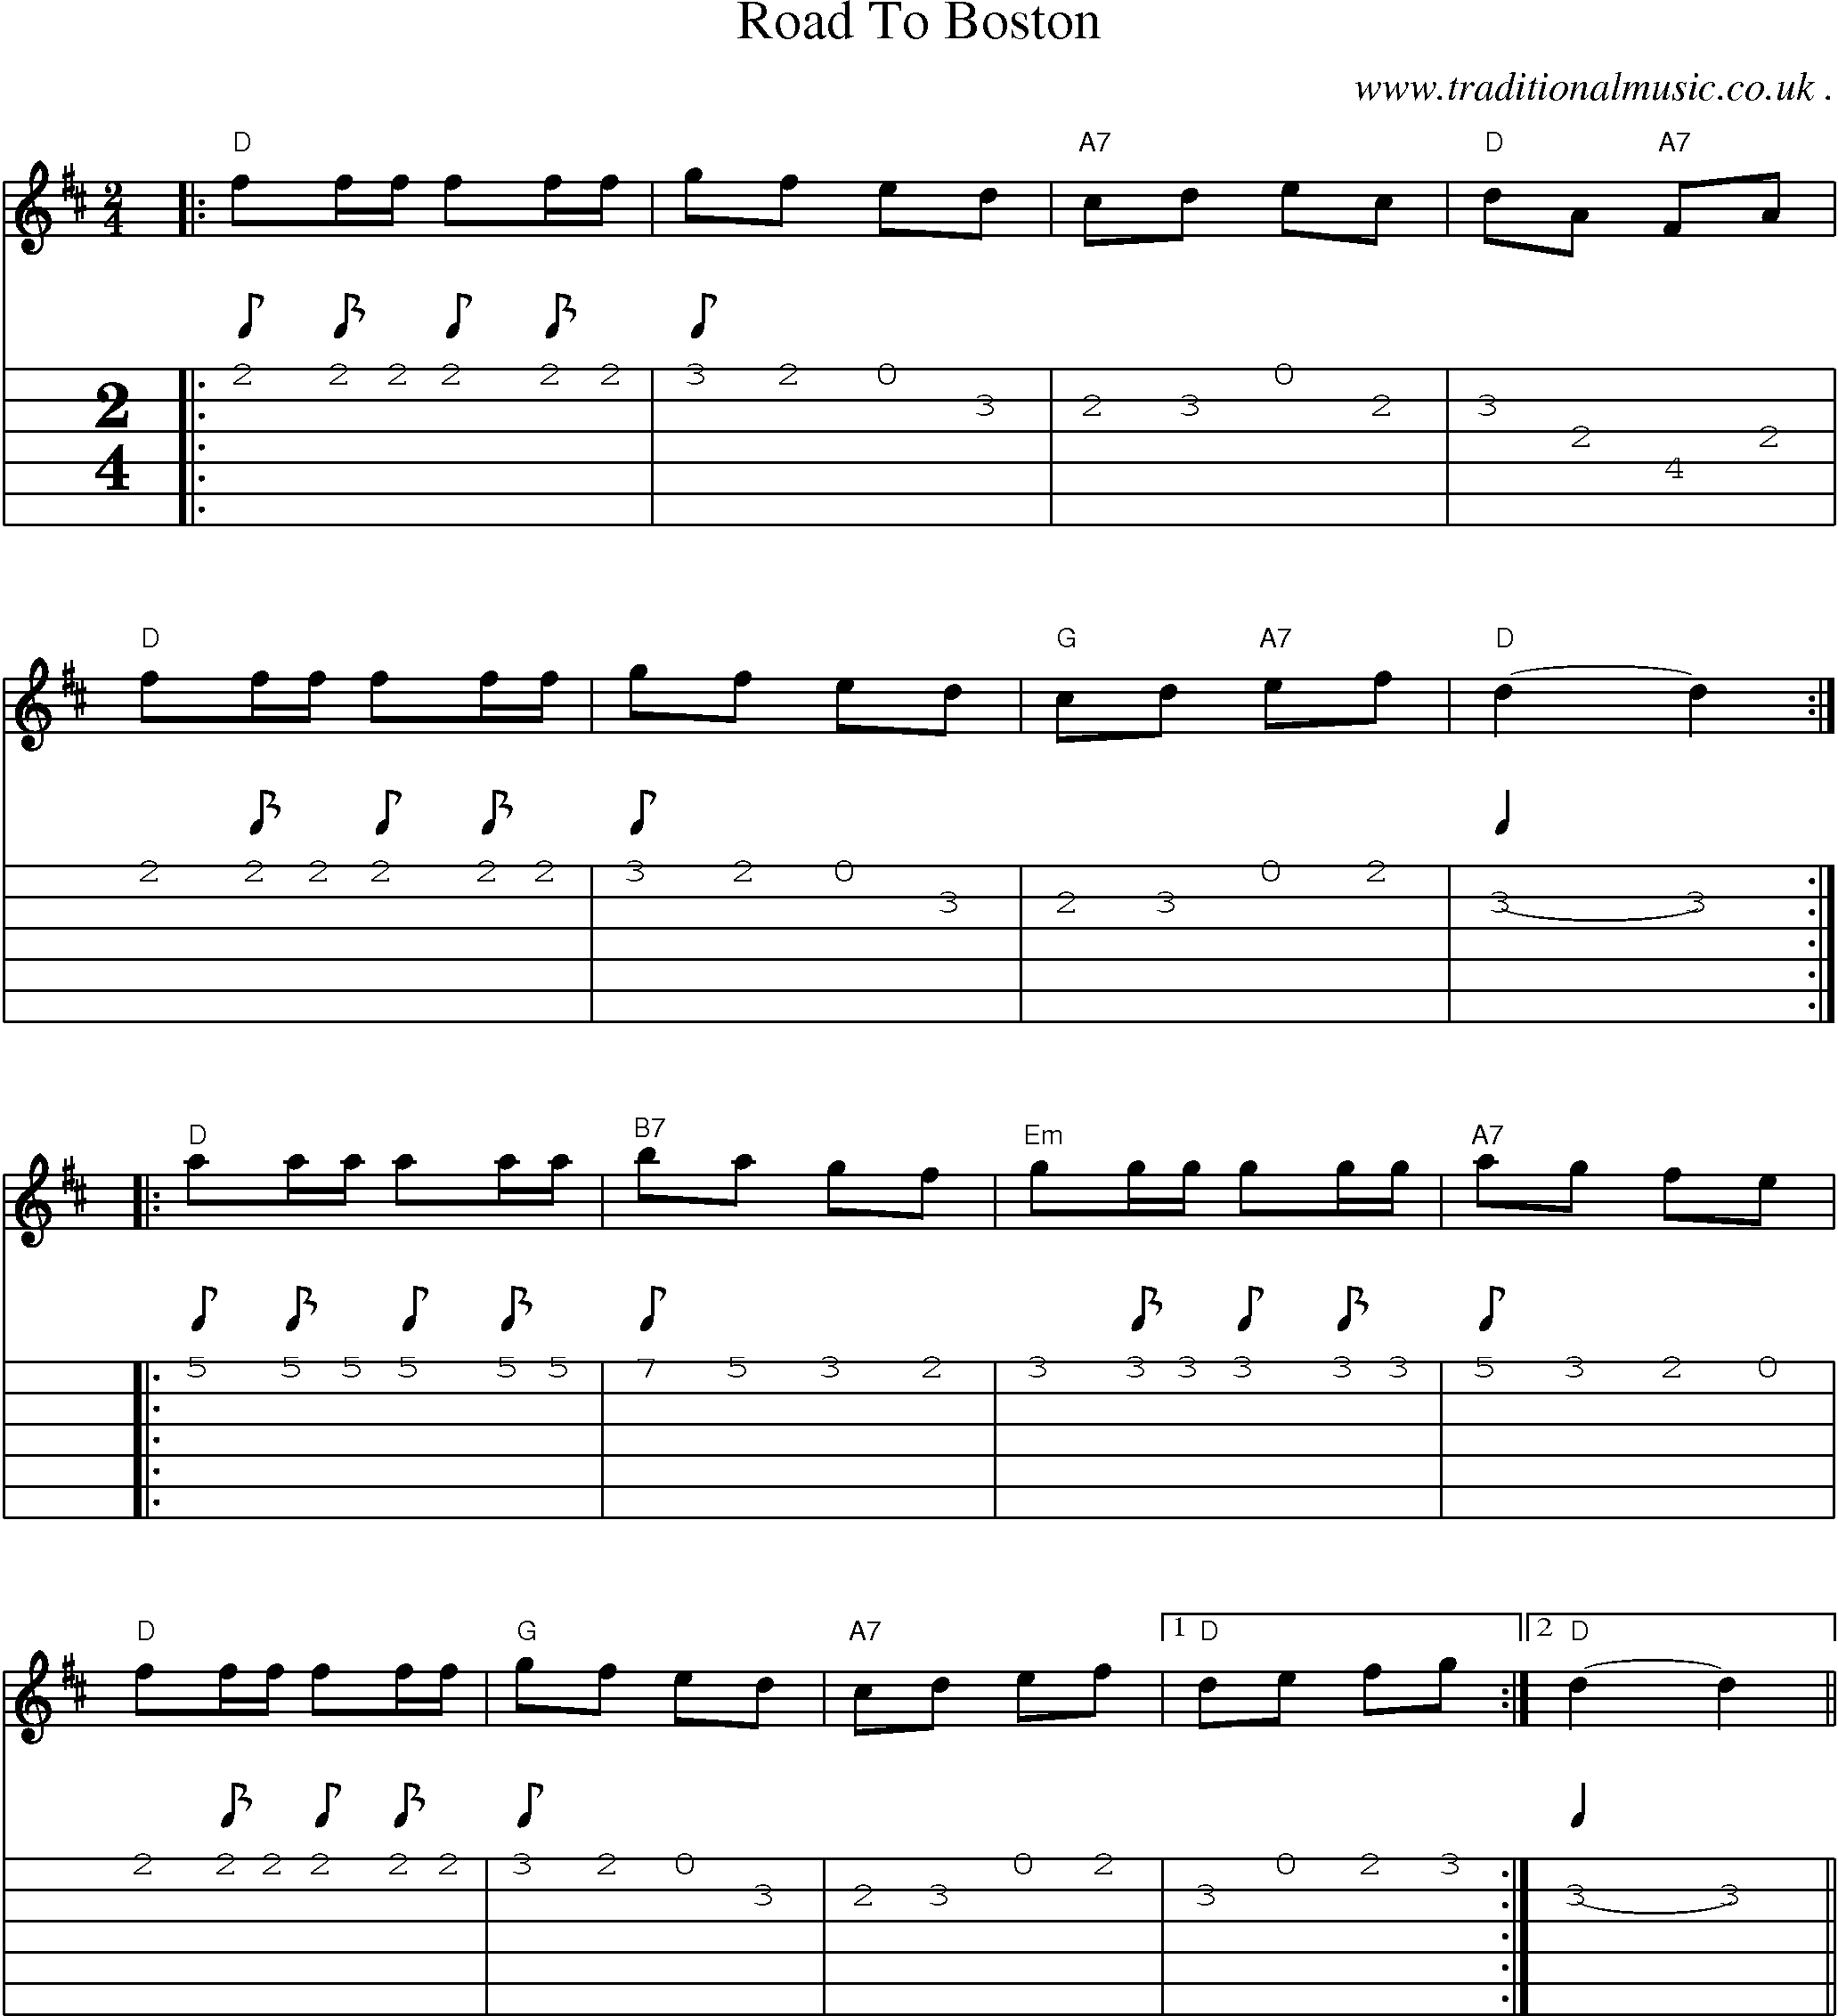 American Old Time Music Scores And Tabs For Guitar Road To Boston